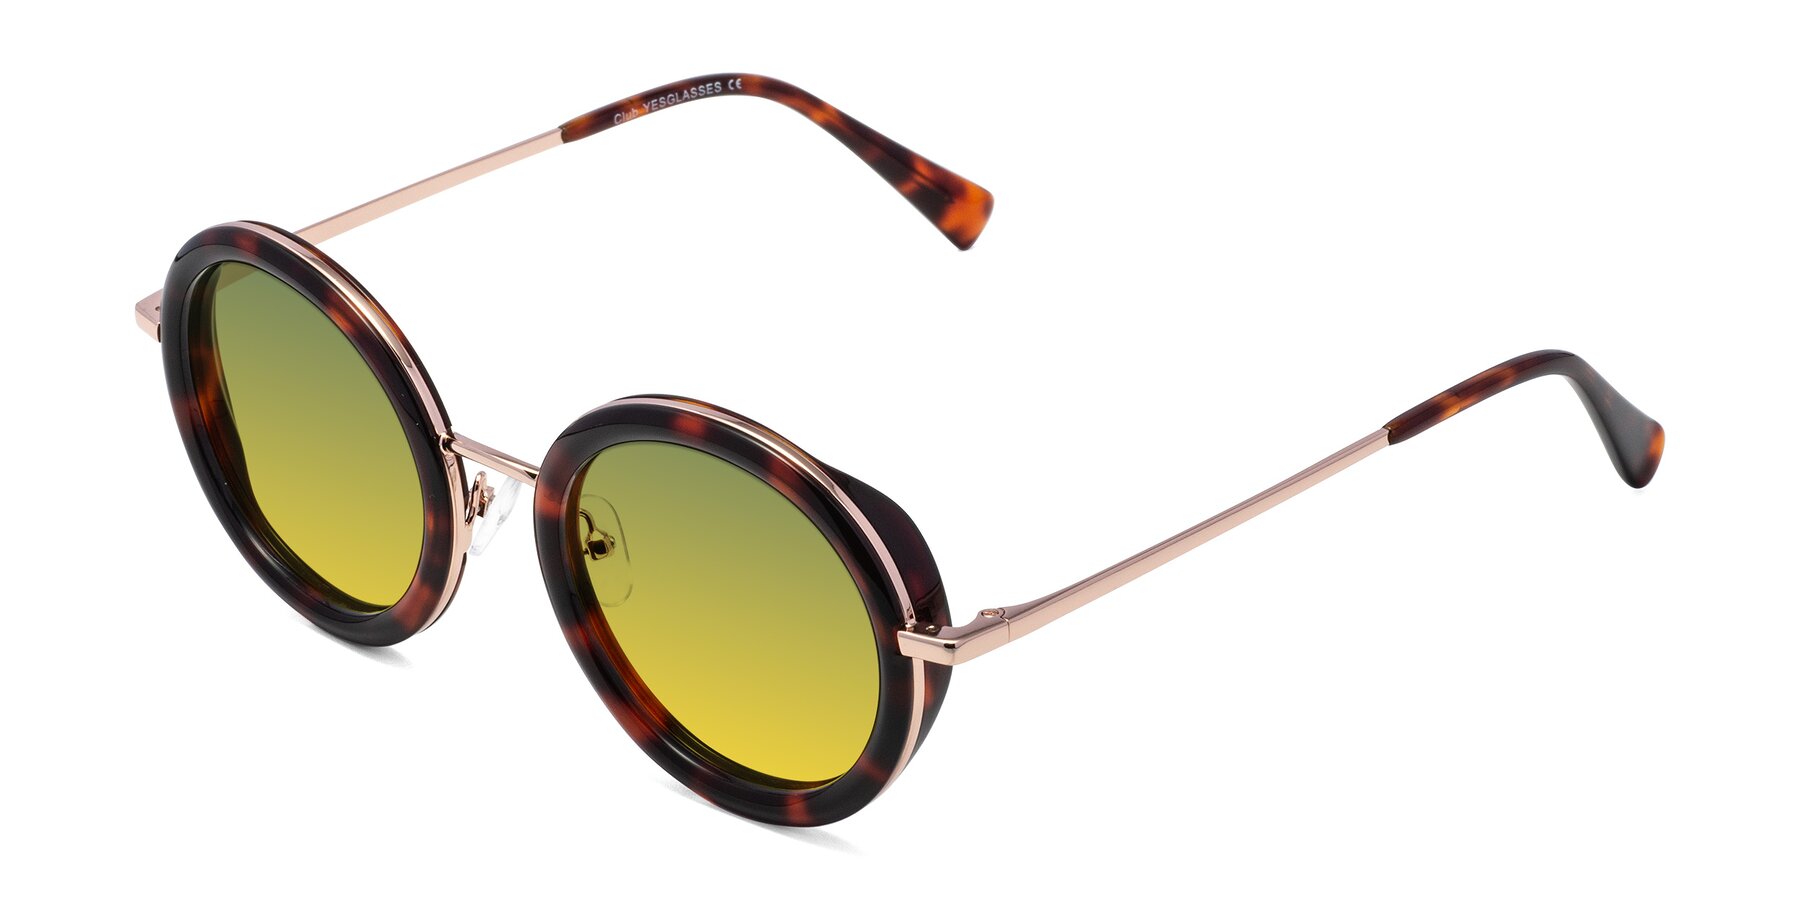 Angle of Club in Tortoise-Rose Gold with Green / Yellow Gradient Lenses